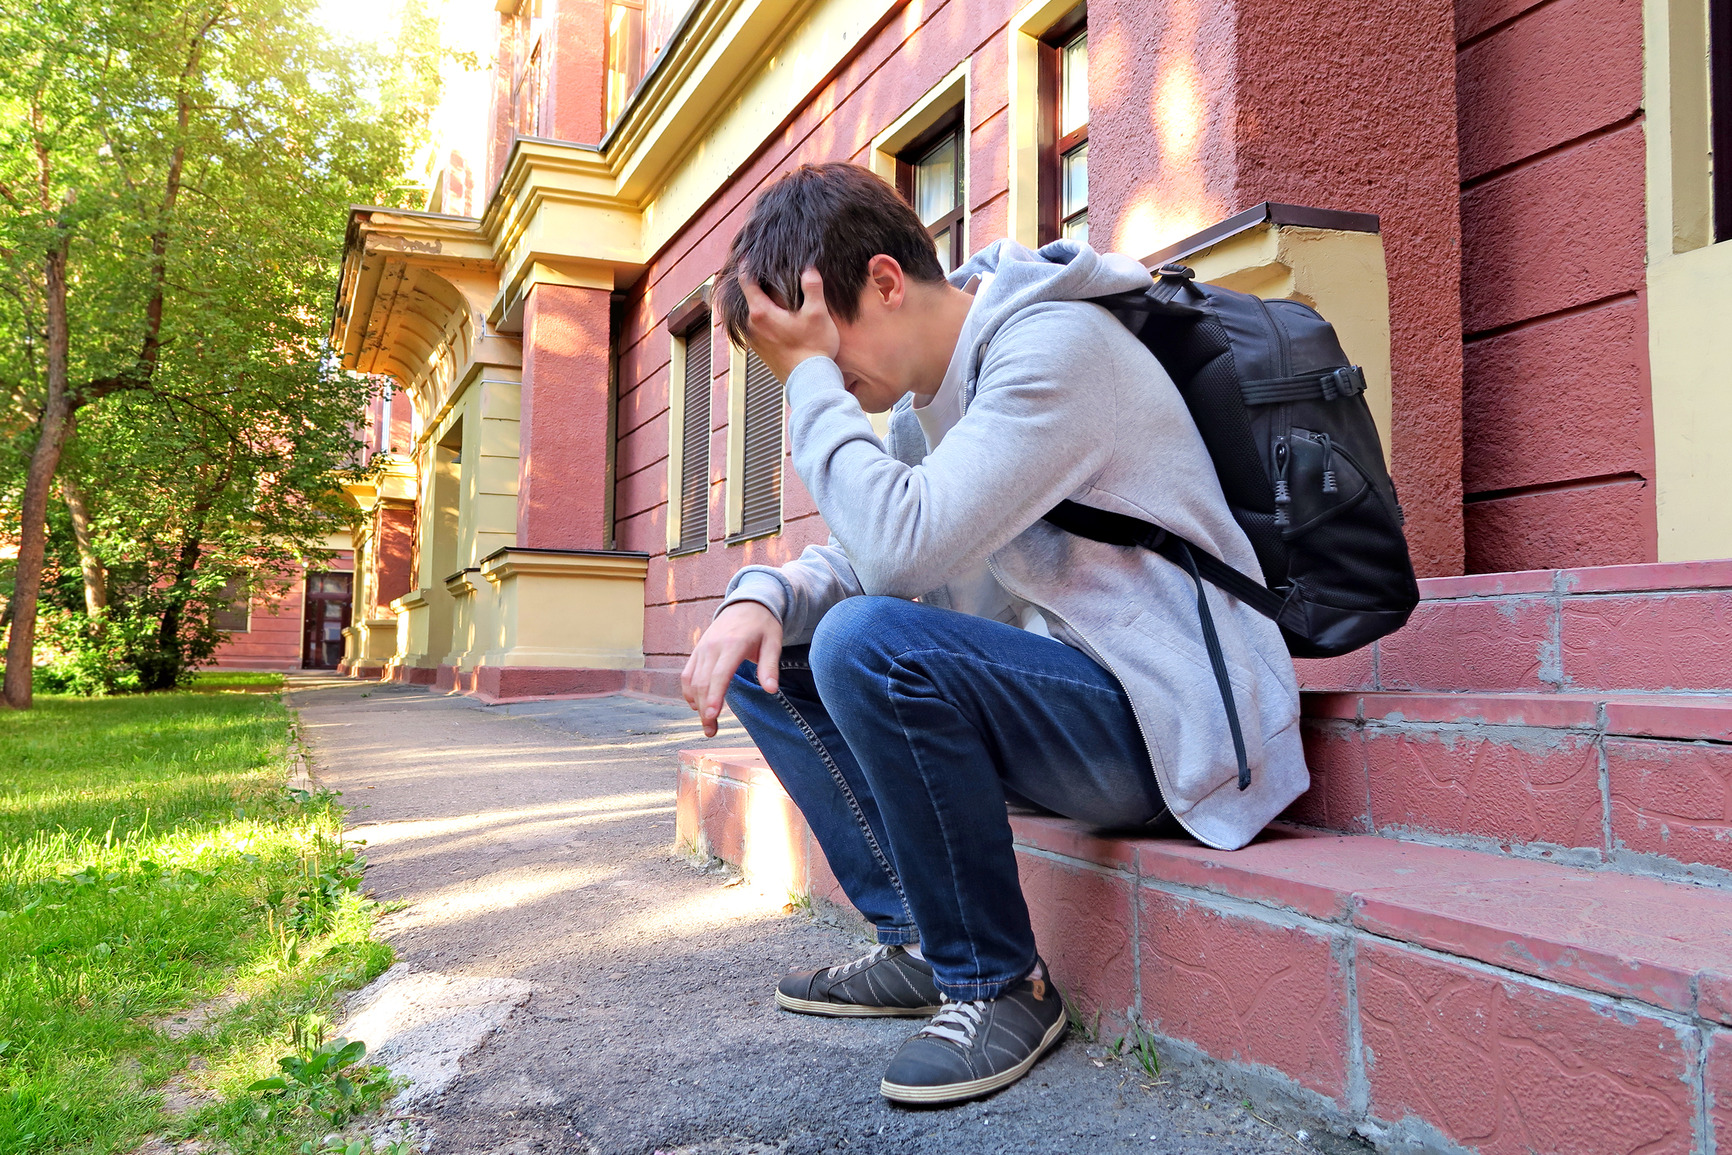 Sad Young Man with Knapsack on the Porch of the House